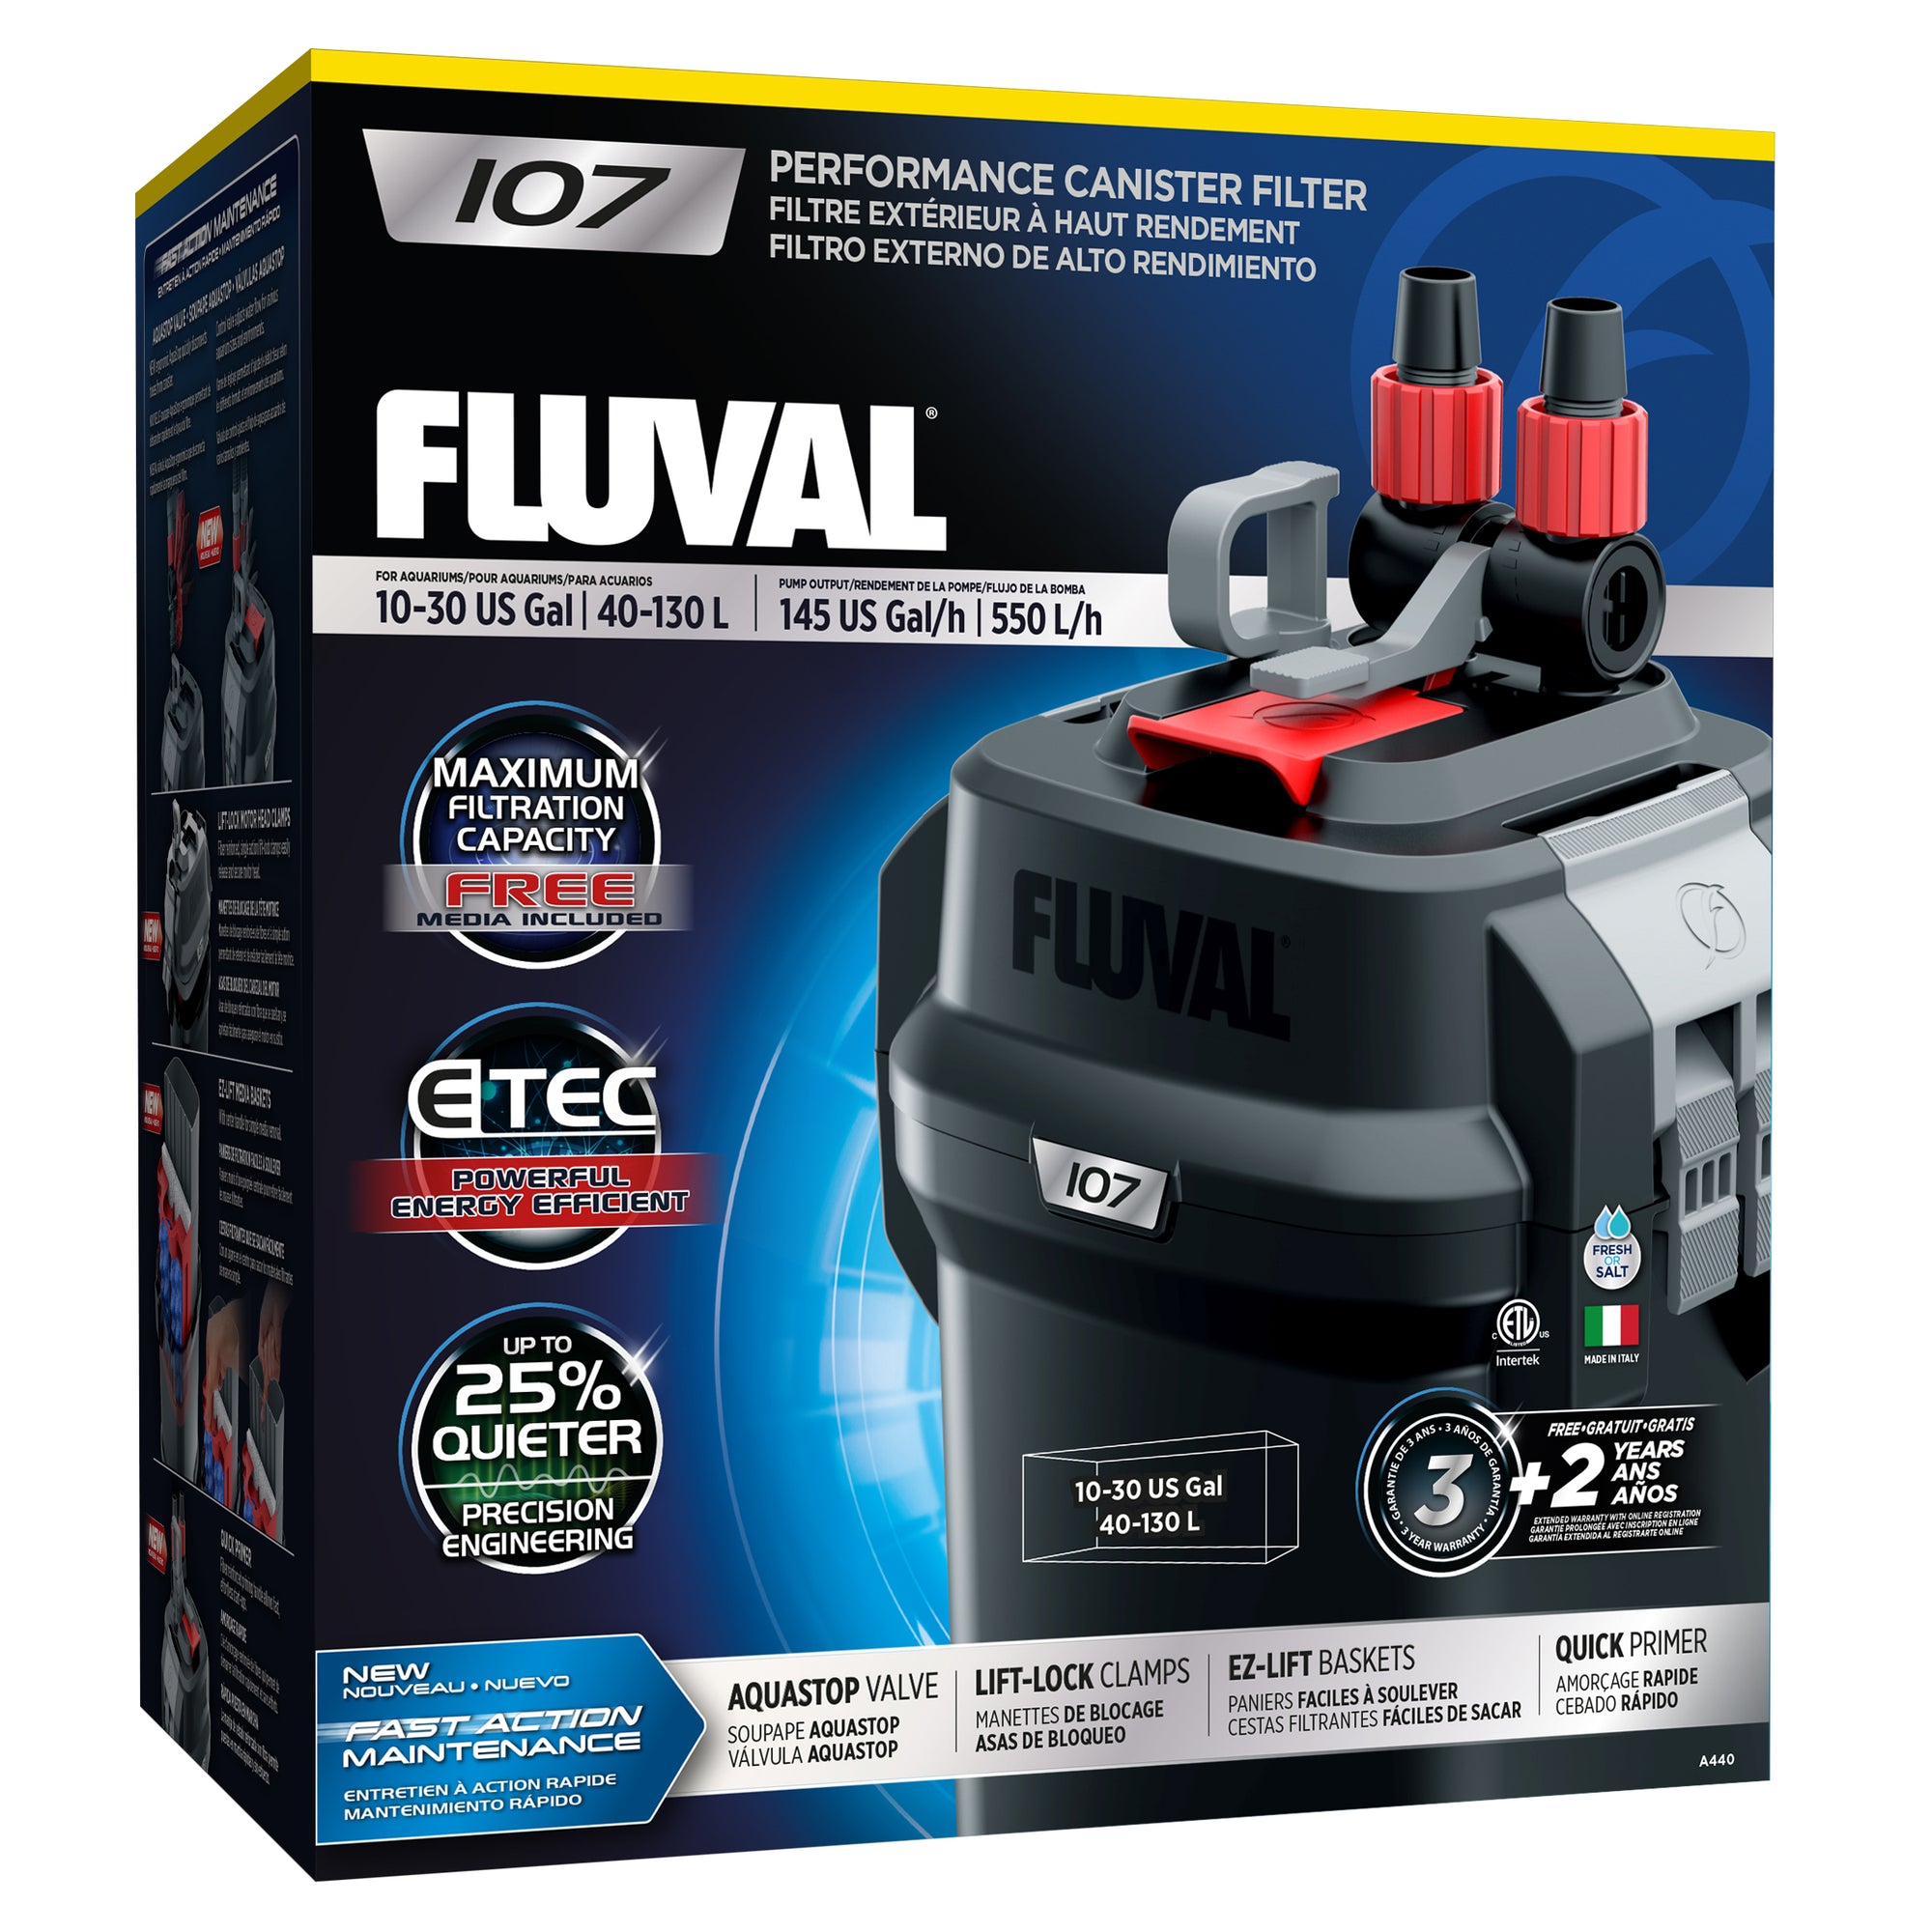 Fluval 107 Performance Canister Filter,  (30 US gal)